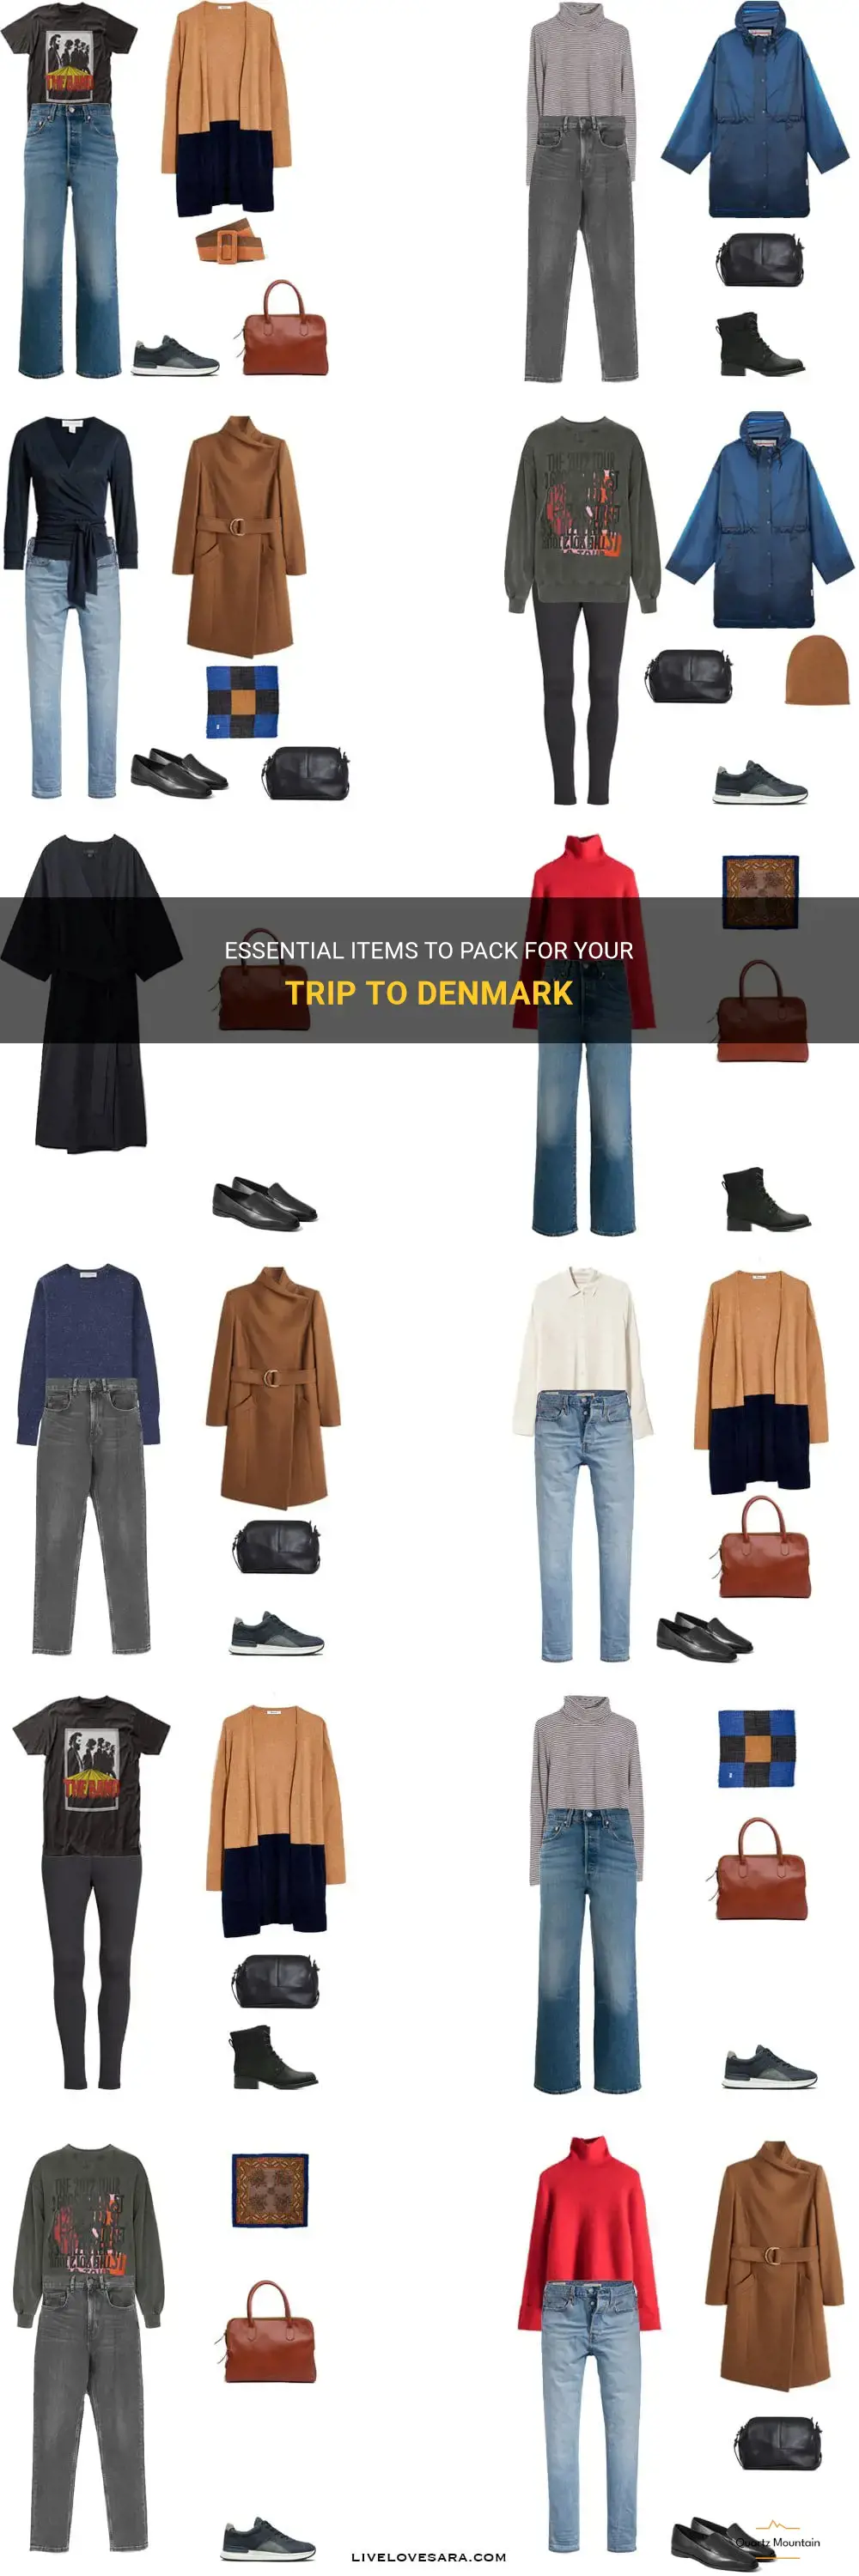 denmark what to pack